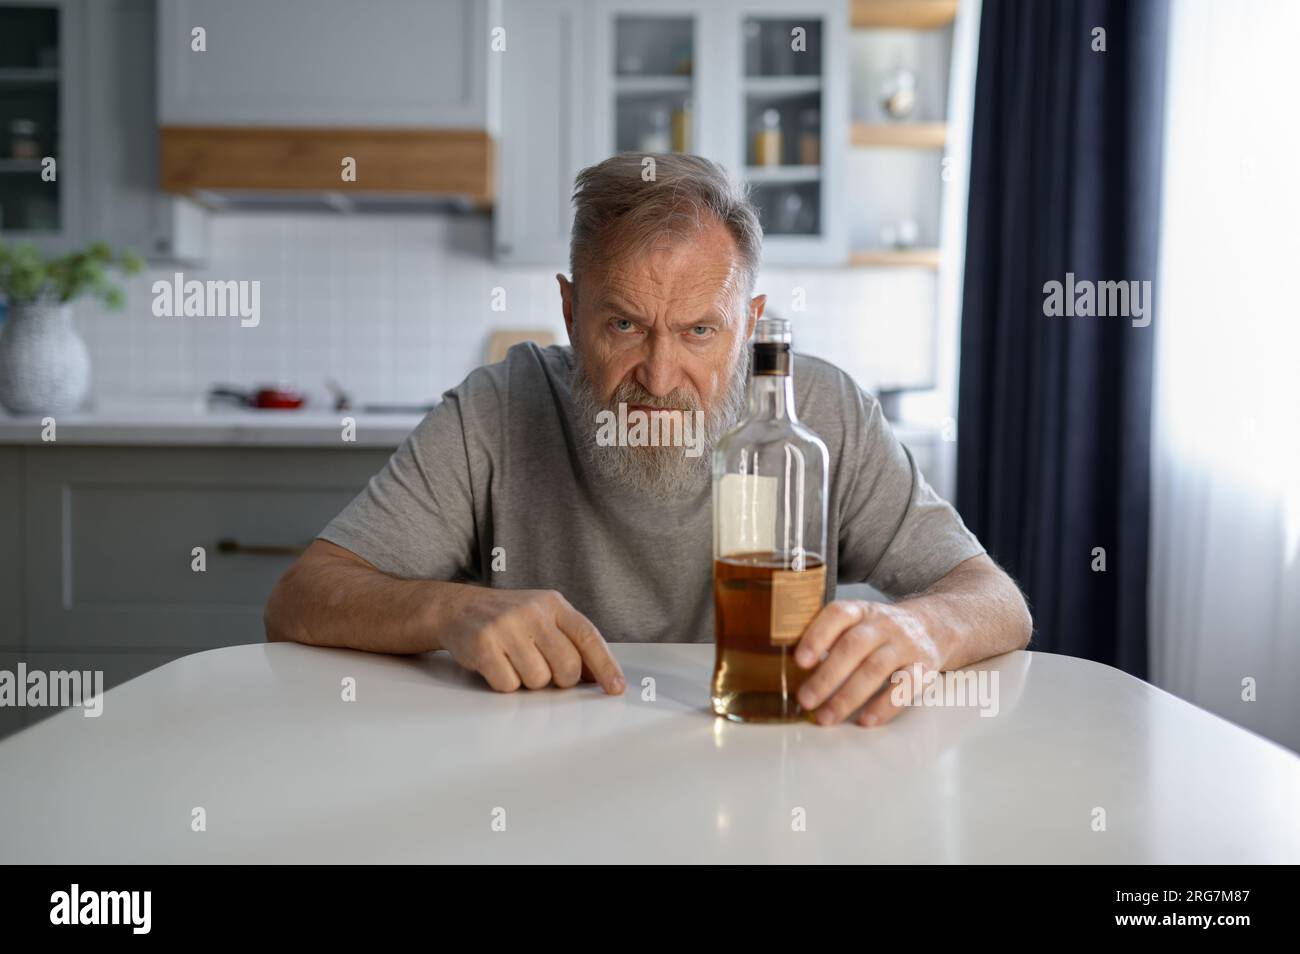 Portrait of lonely drunk man feeling depressed on home kitchen Stock Photo